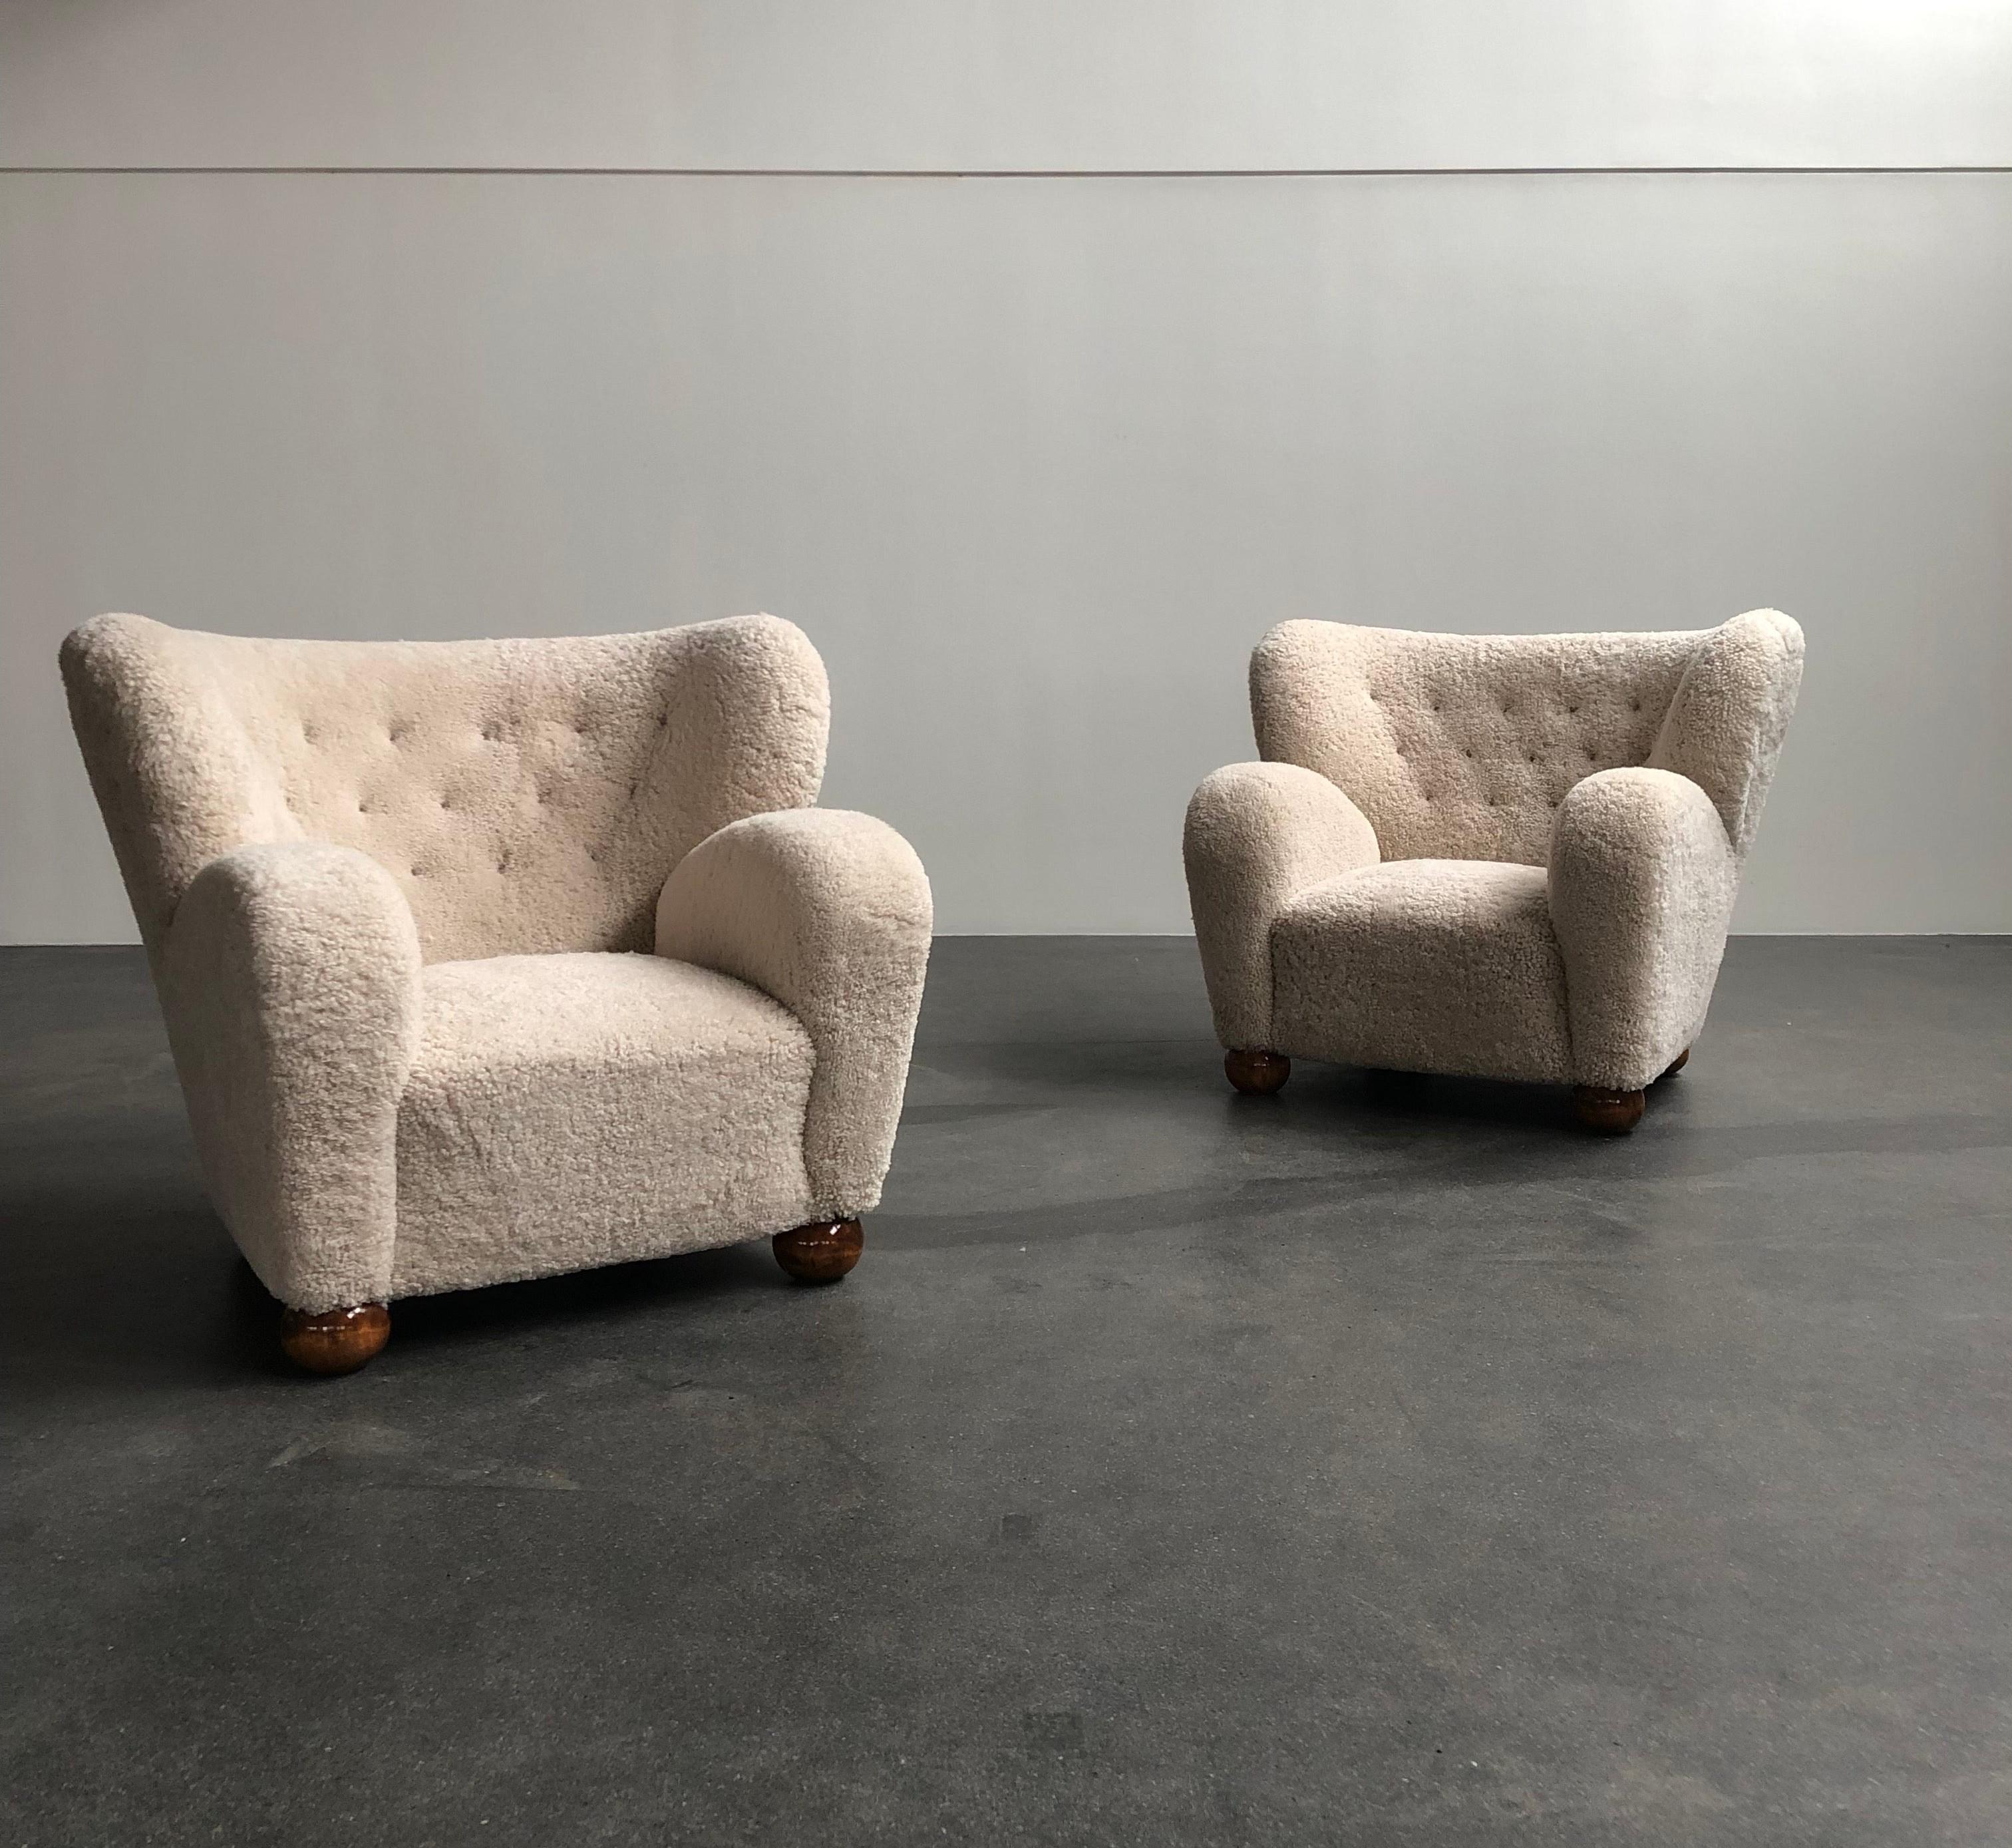 Marta Blomstedt Pair of Easy Chairs in Sheepskin for Hotel Aulanko Finland, 1939 For Sale 1